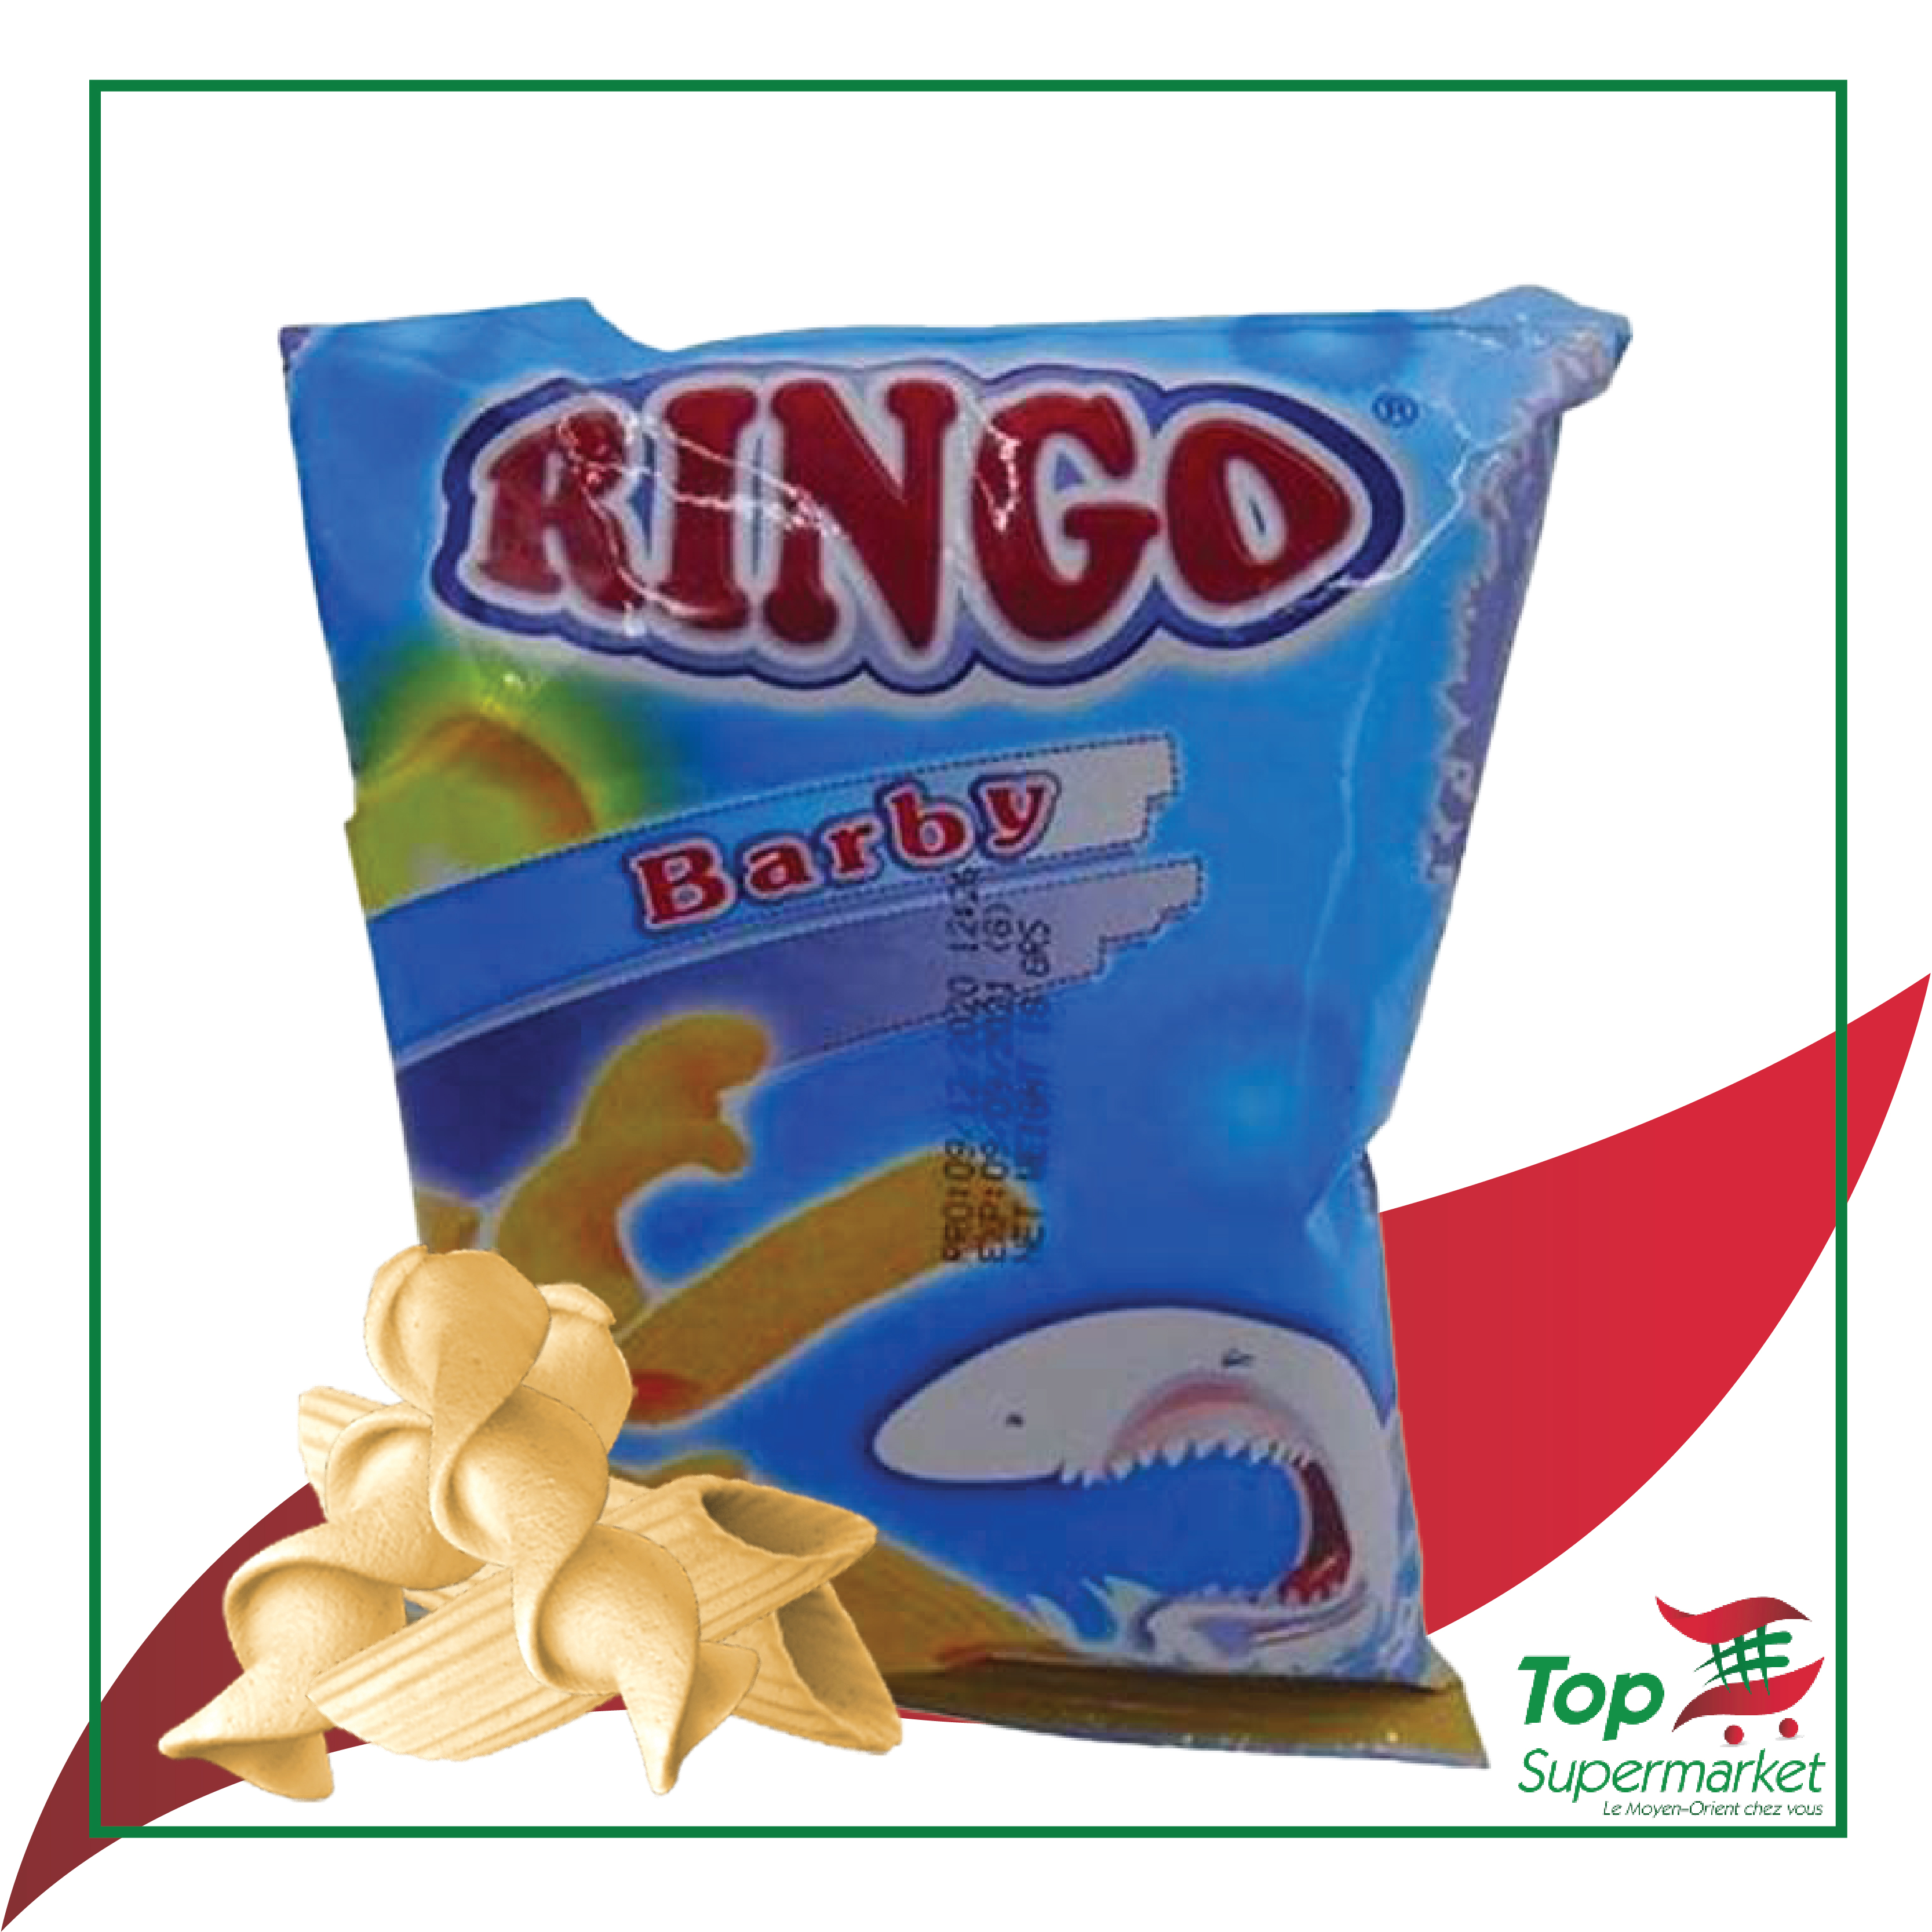 Ringo Chips Barby 25g